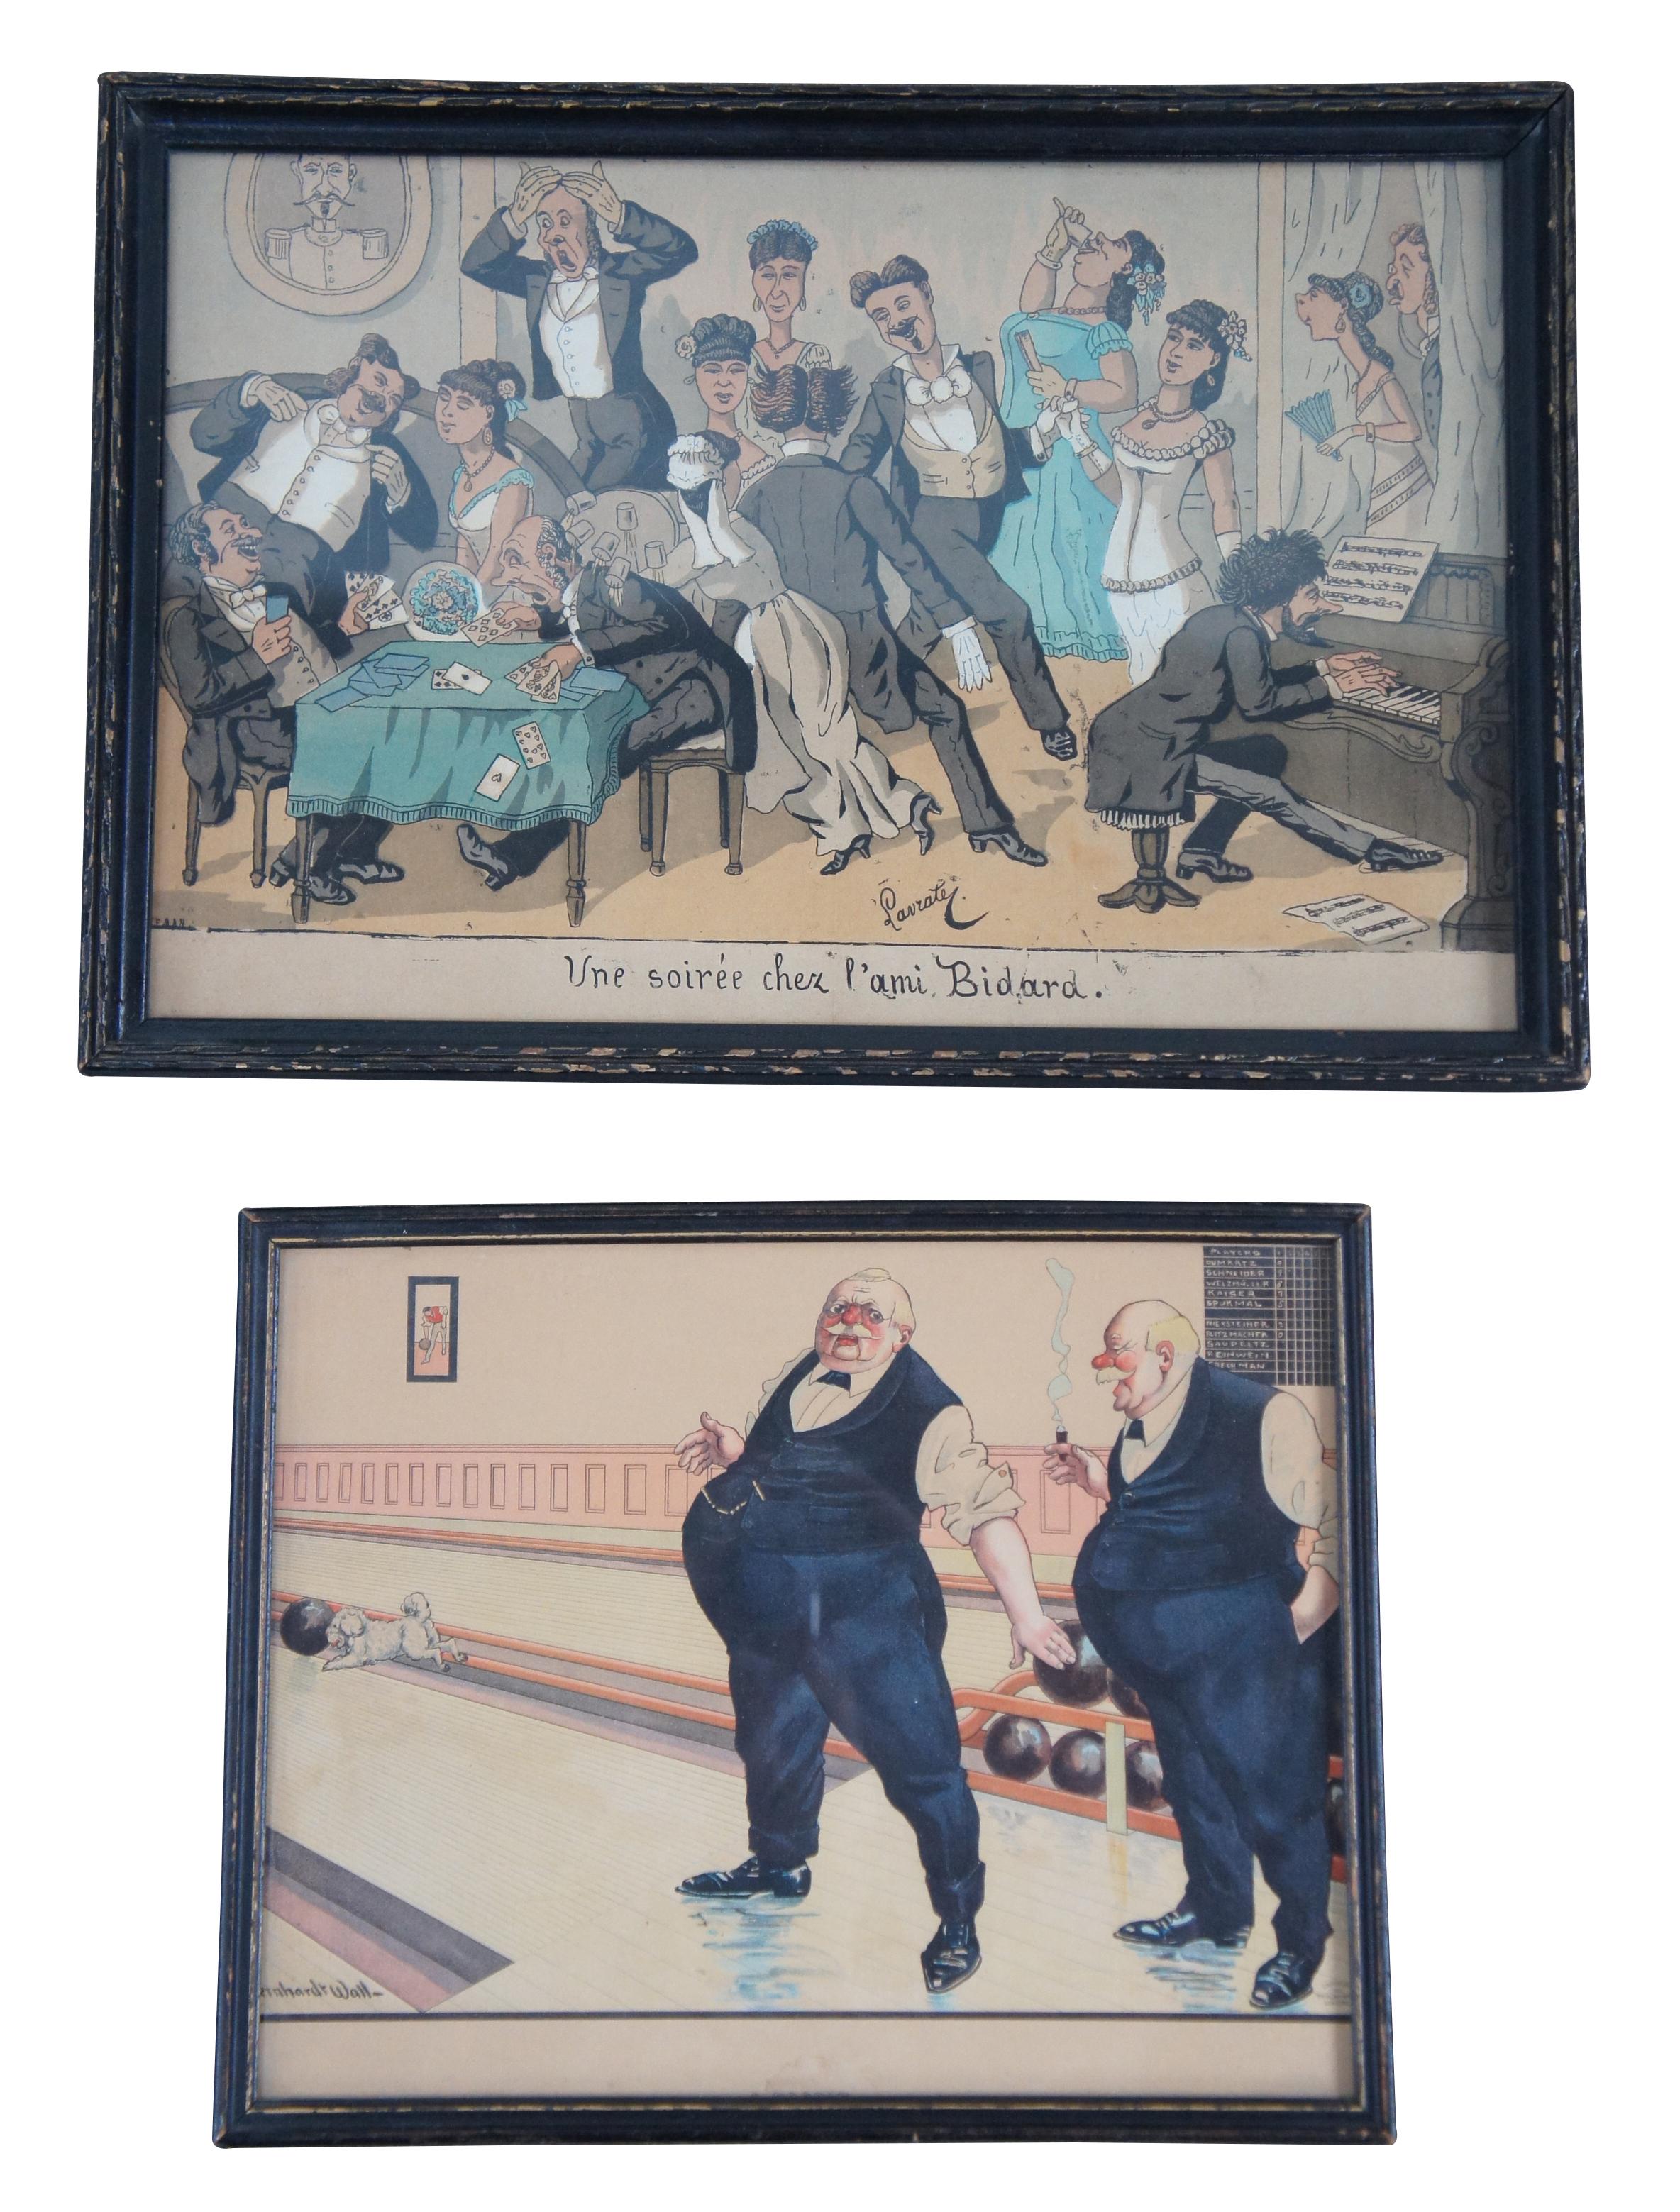 -5 Early 20th century lithographs by Bernhardt Wall (1872-1954, American) published by Joseph Hoover & Son, (Philadelphia and New York) as well as The Ullman Mfg co New York
-1 by Edmond Lavrate

Titles
